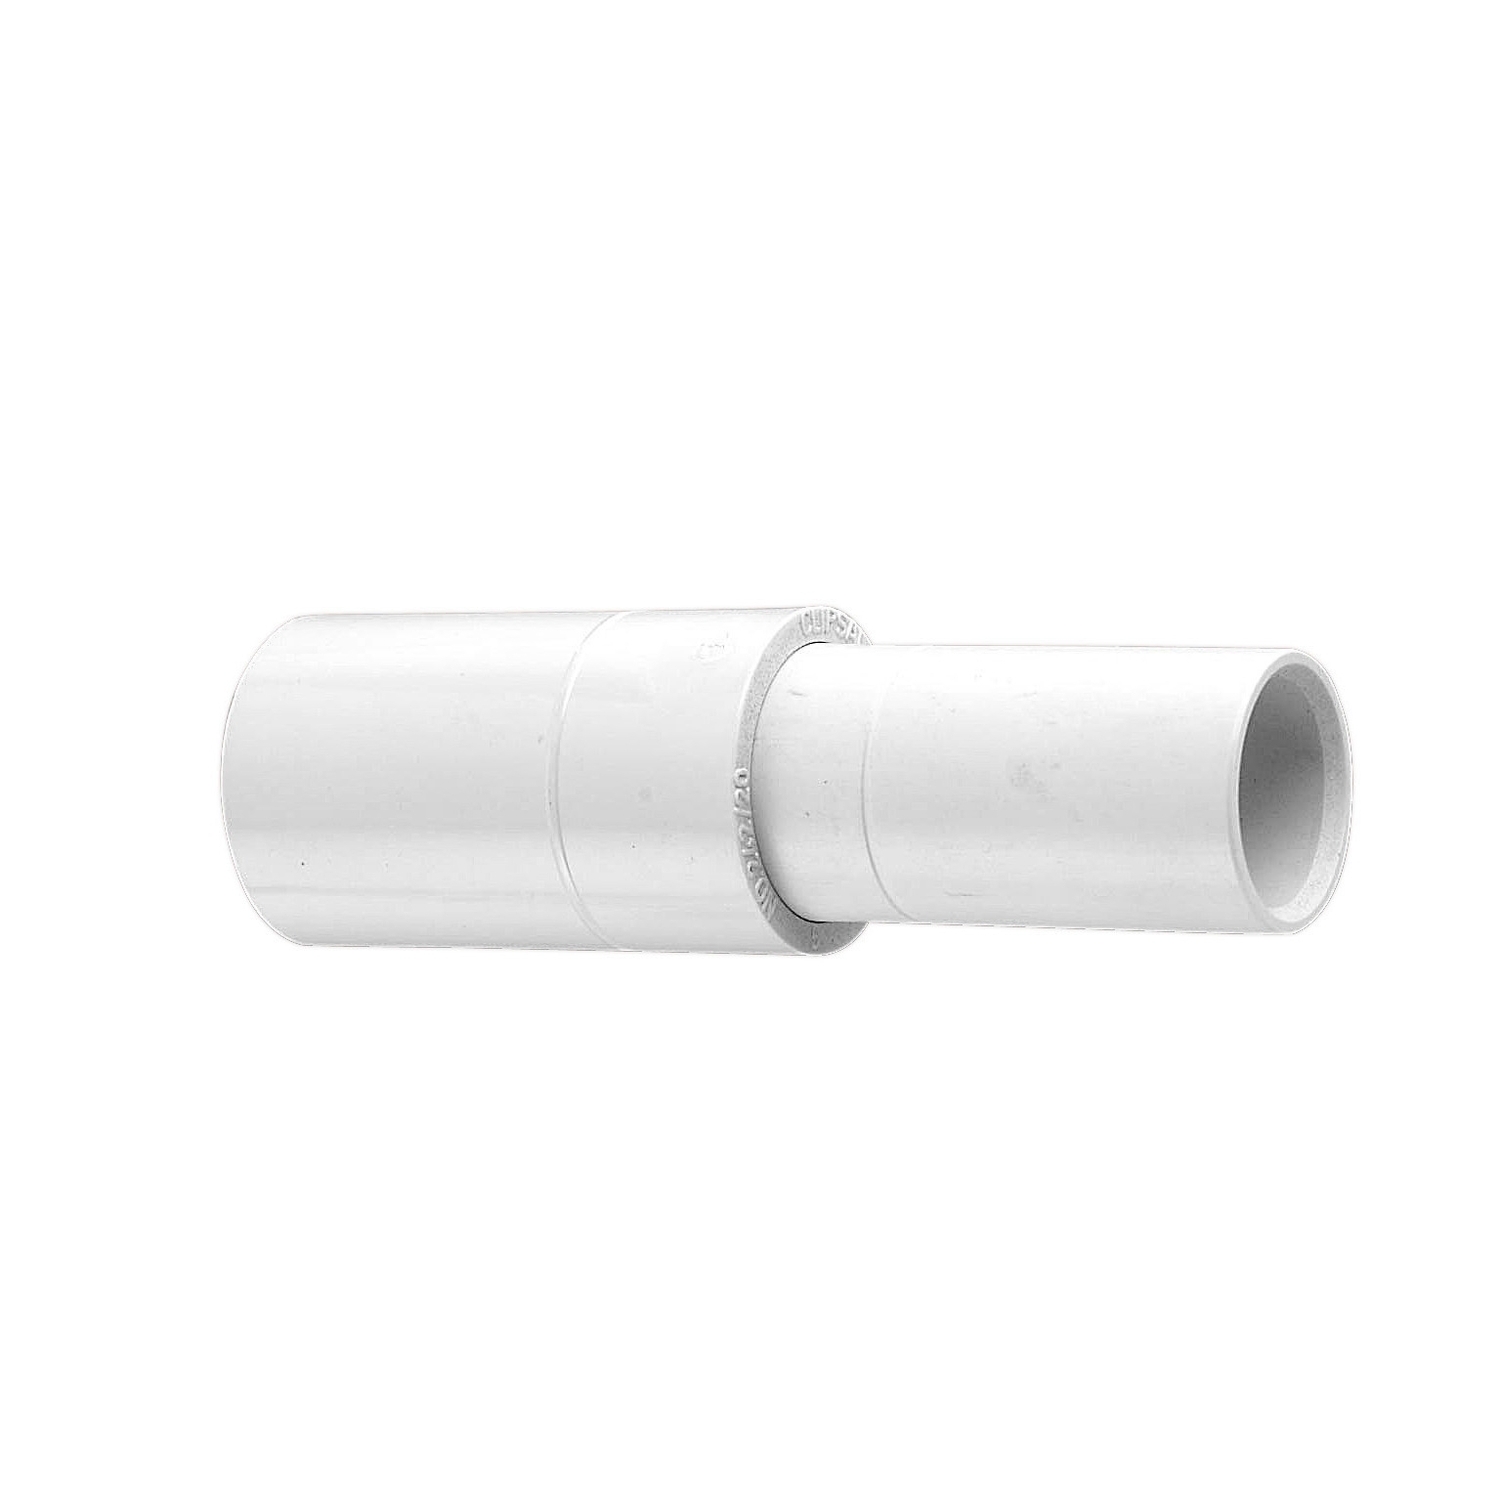 Solid Fittings - PVC, Expansion Couplings - Slip Type, 25mm, Grey